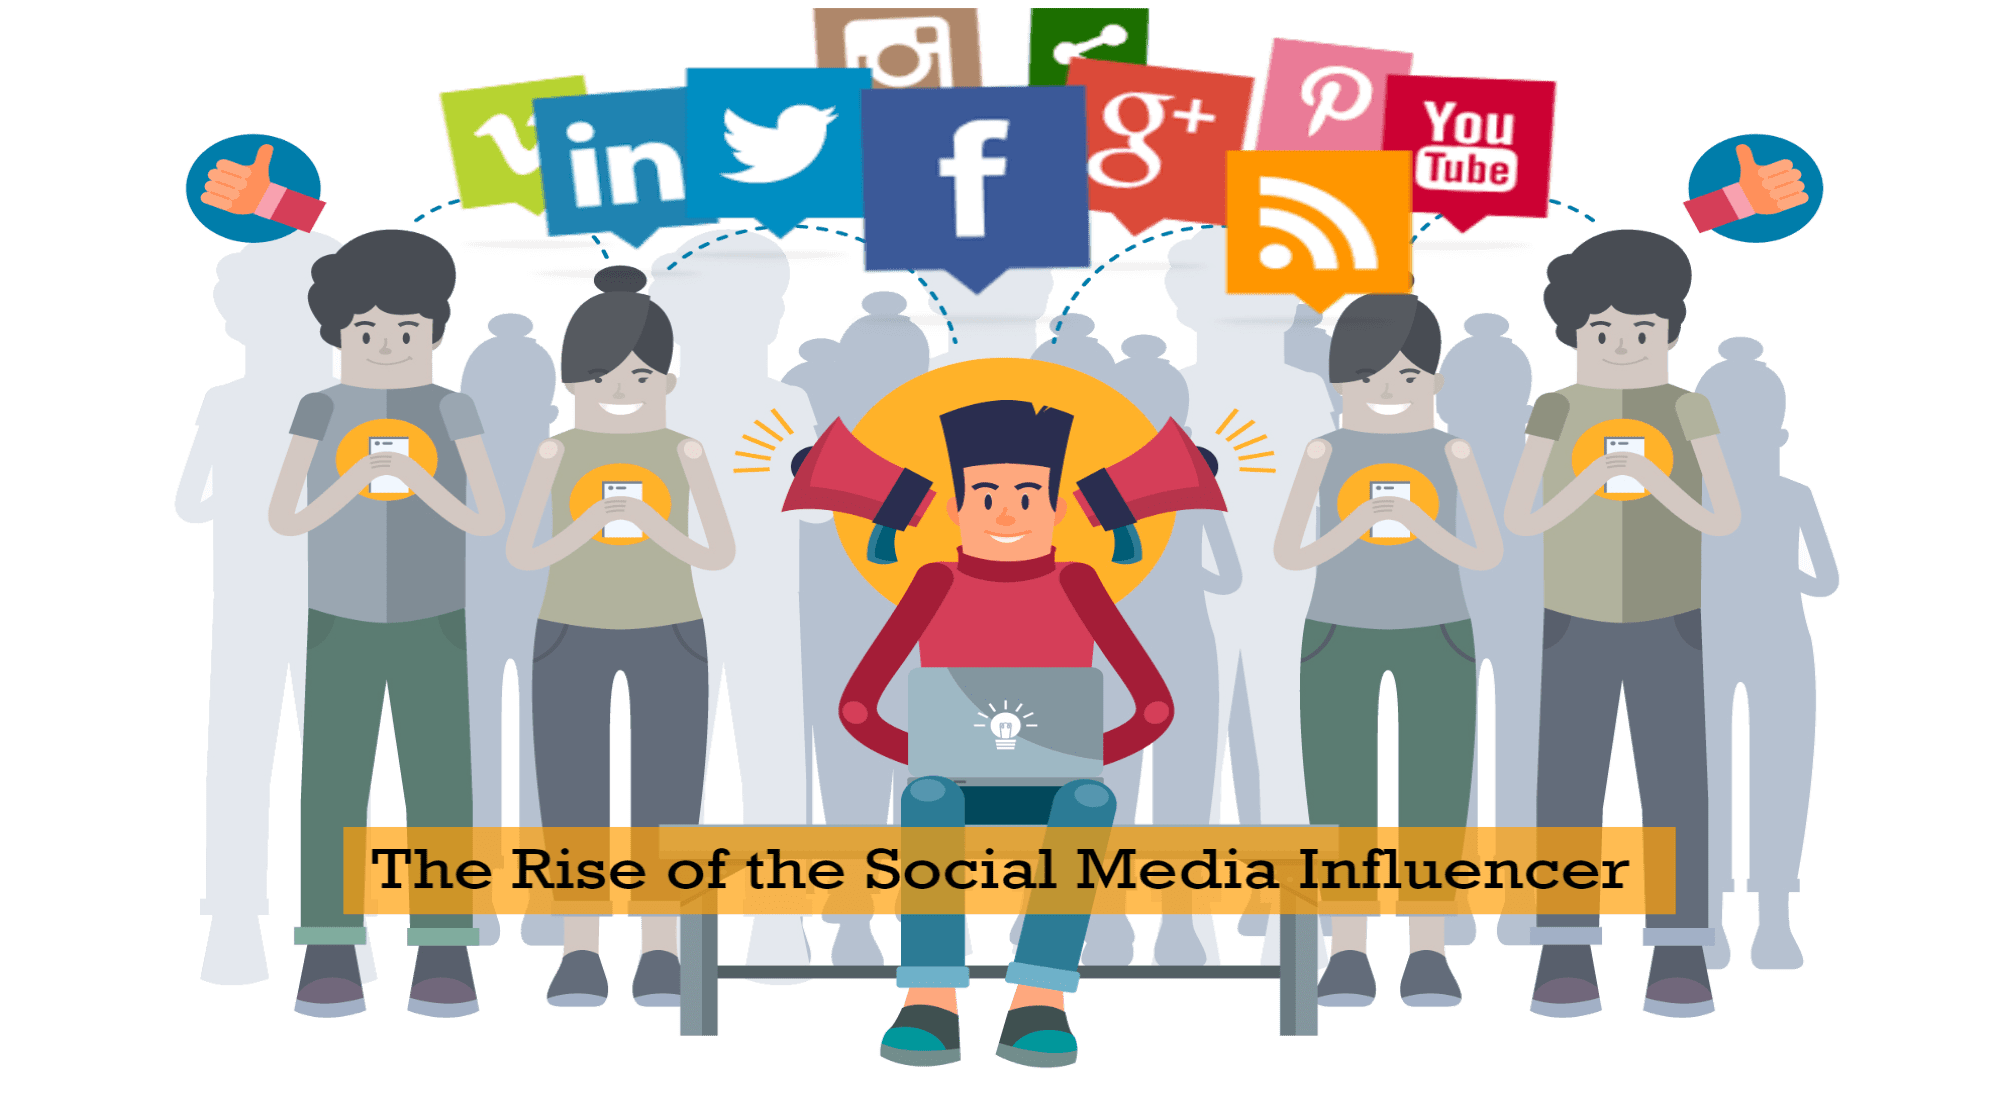 The Rise of the Social Media Influencer